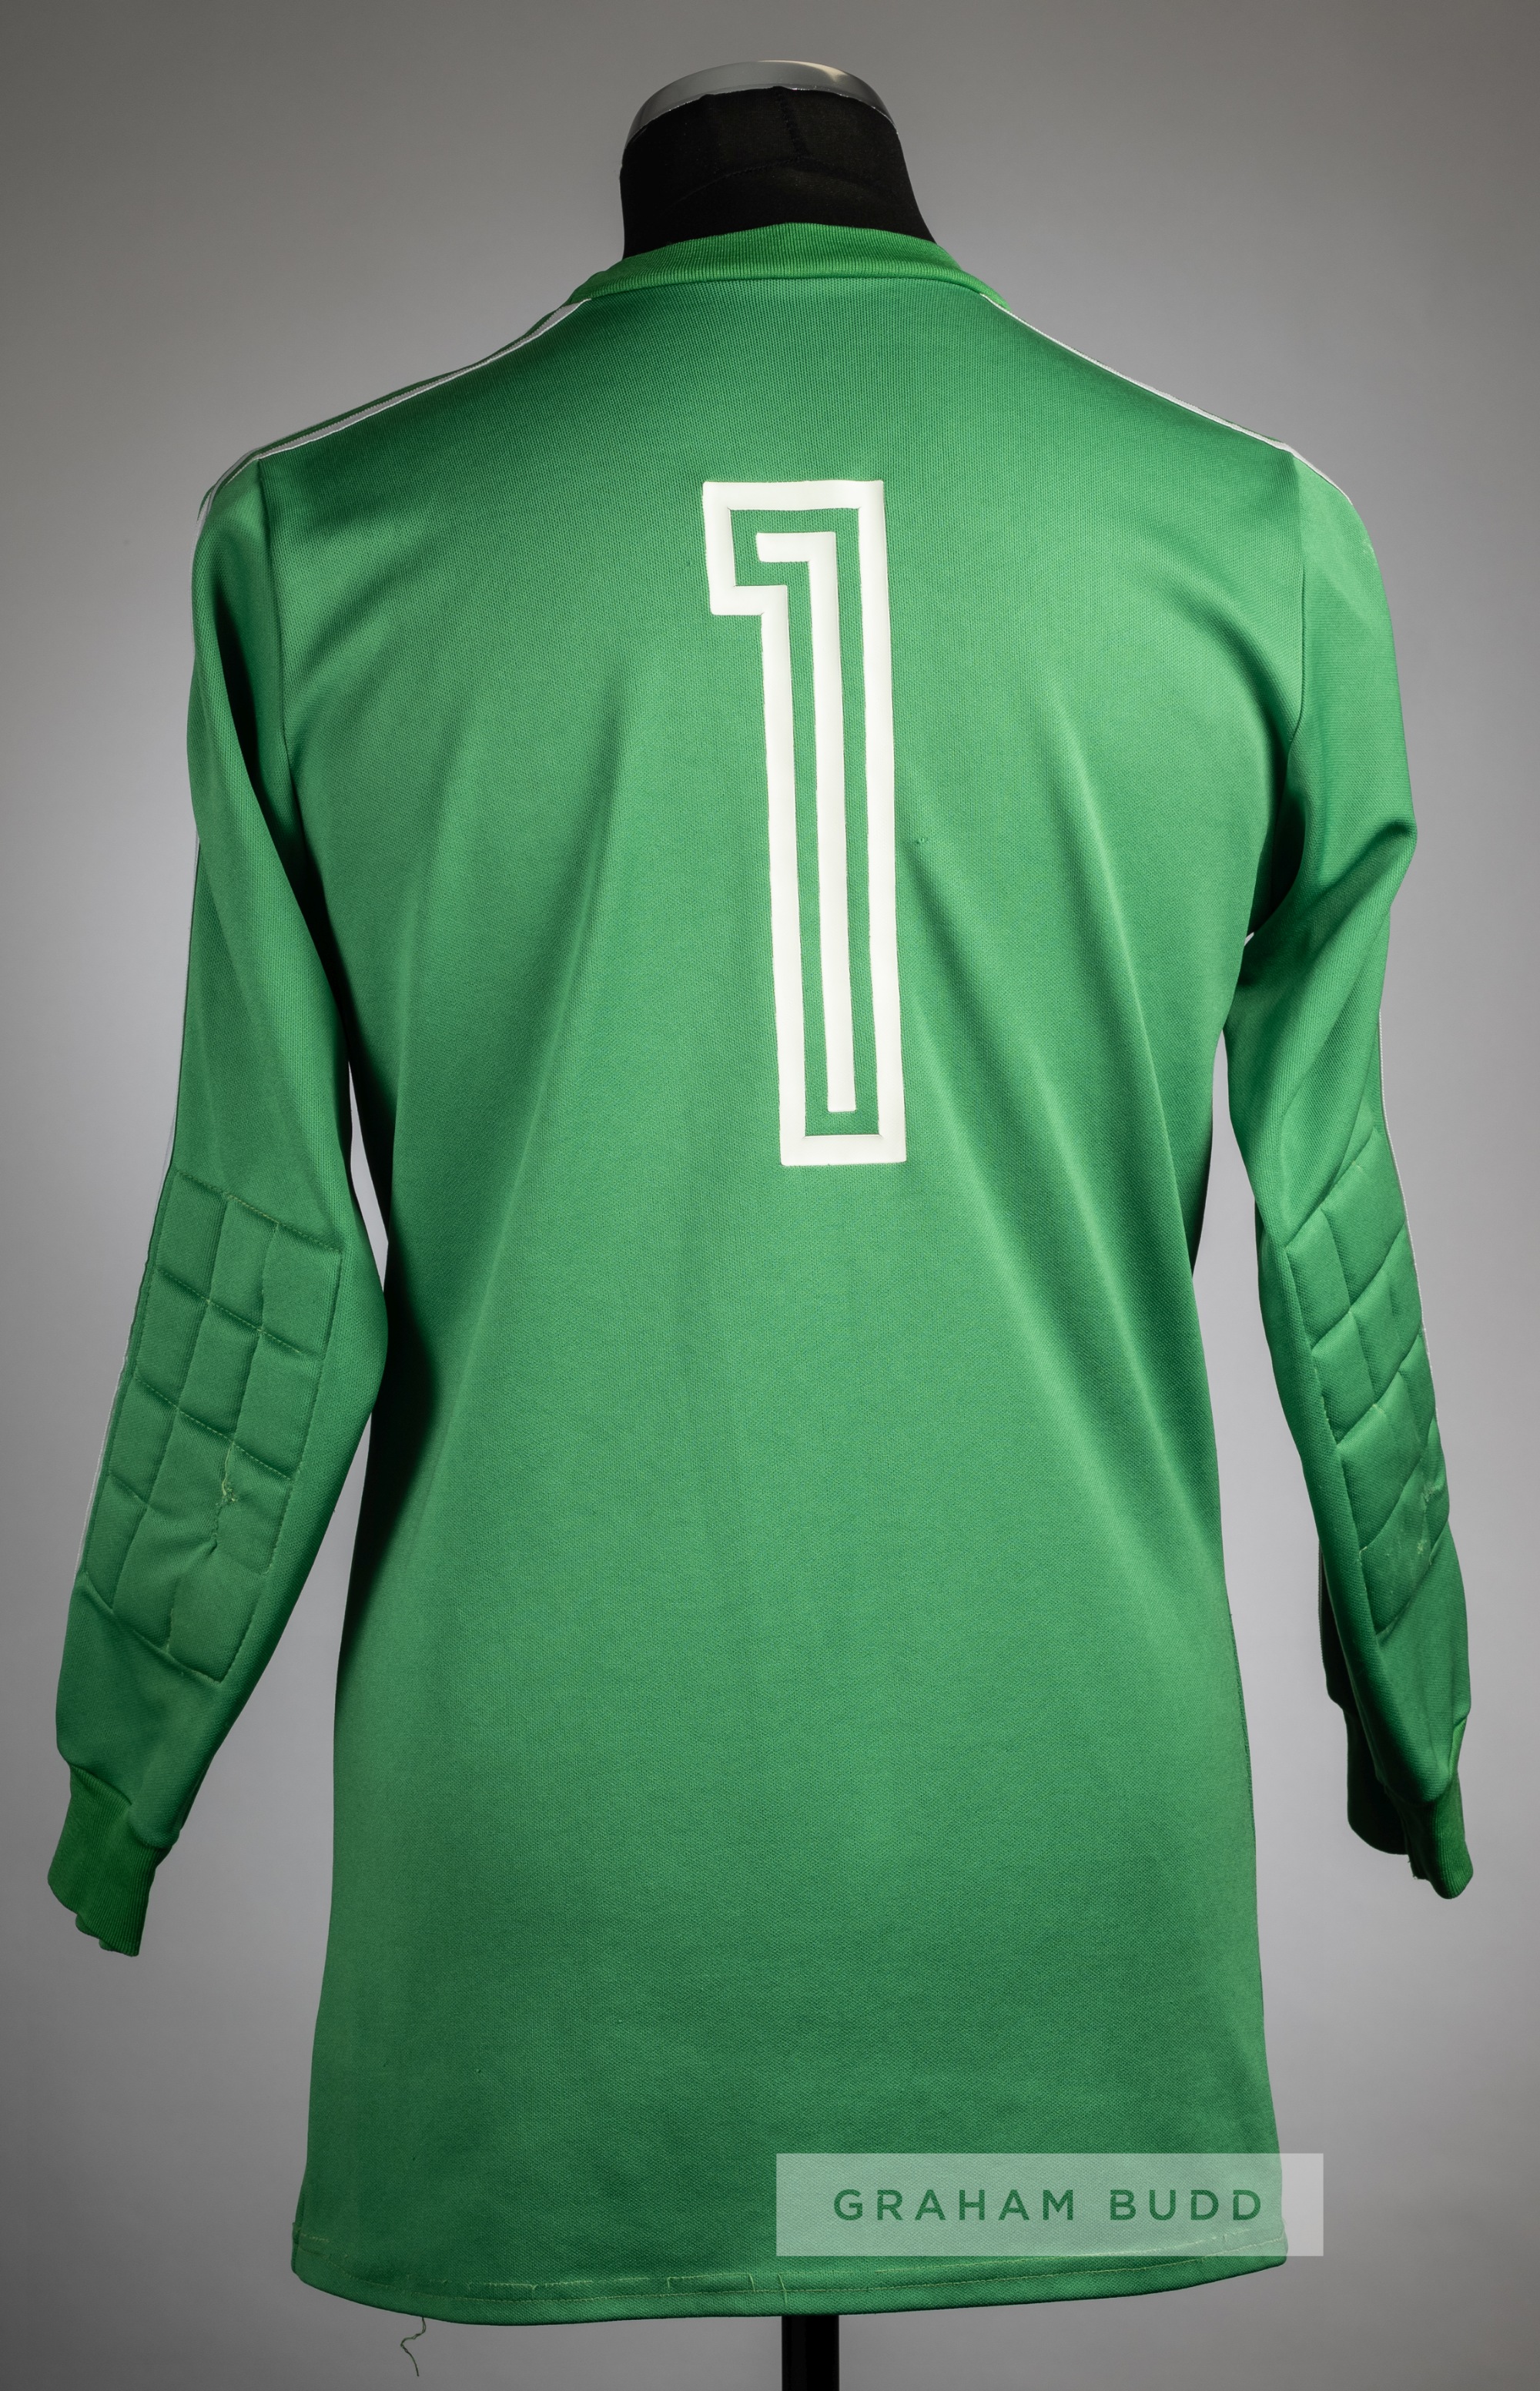 Green Slovan Bratislava No.1 goalkeeper's jersey, circa 1984, Adidas, long-sleeved with club crest - Image 2 of 2